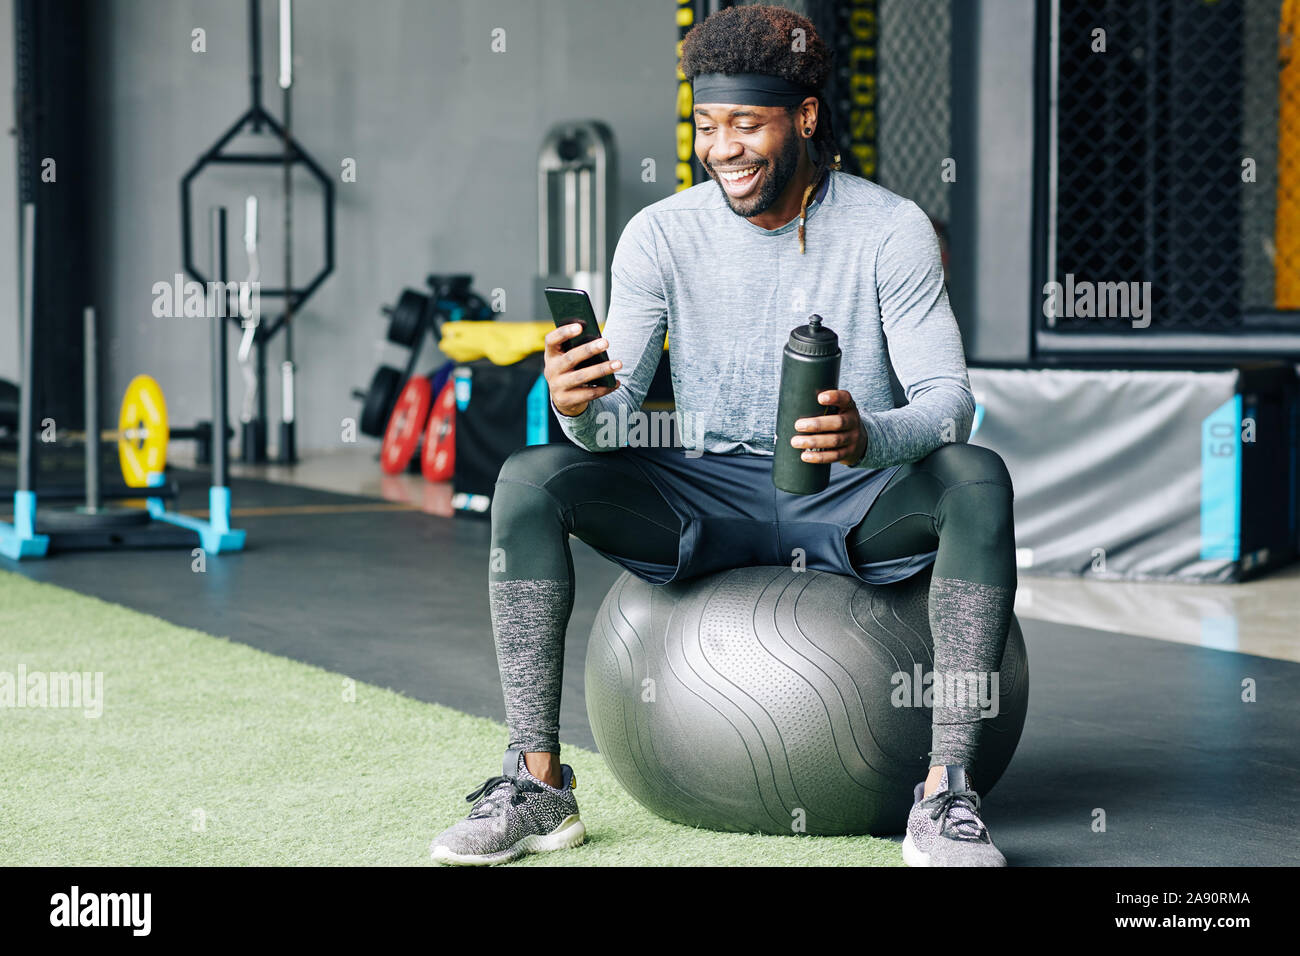 Water bottle, black man in gym and smartphone for social media